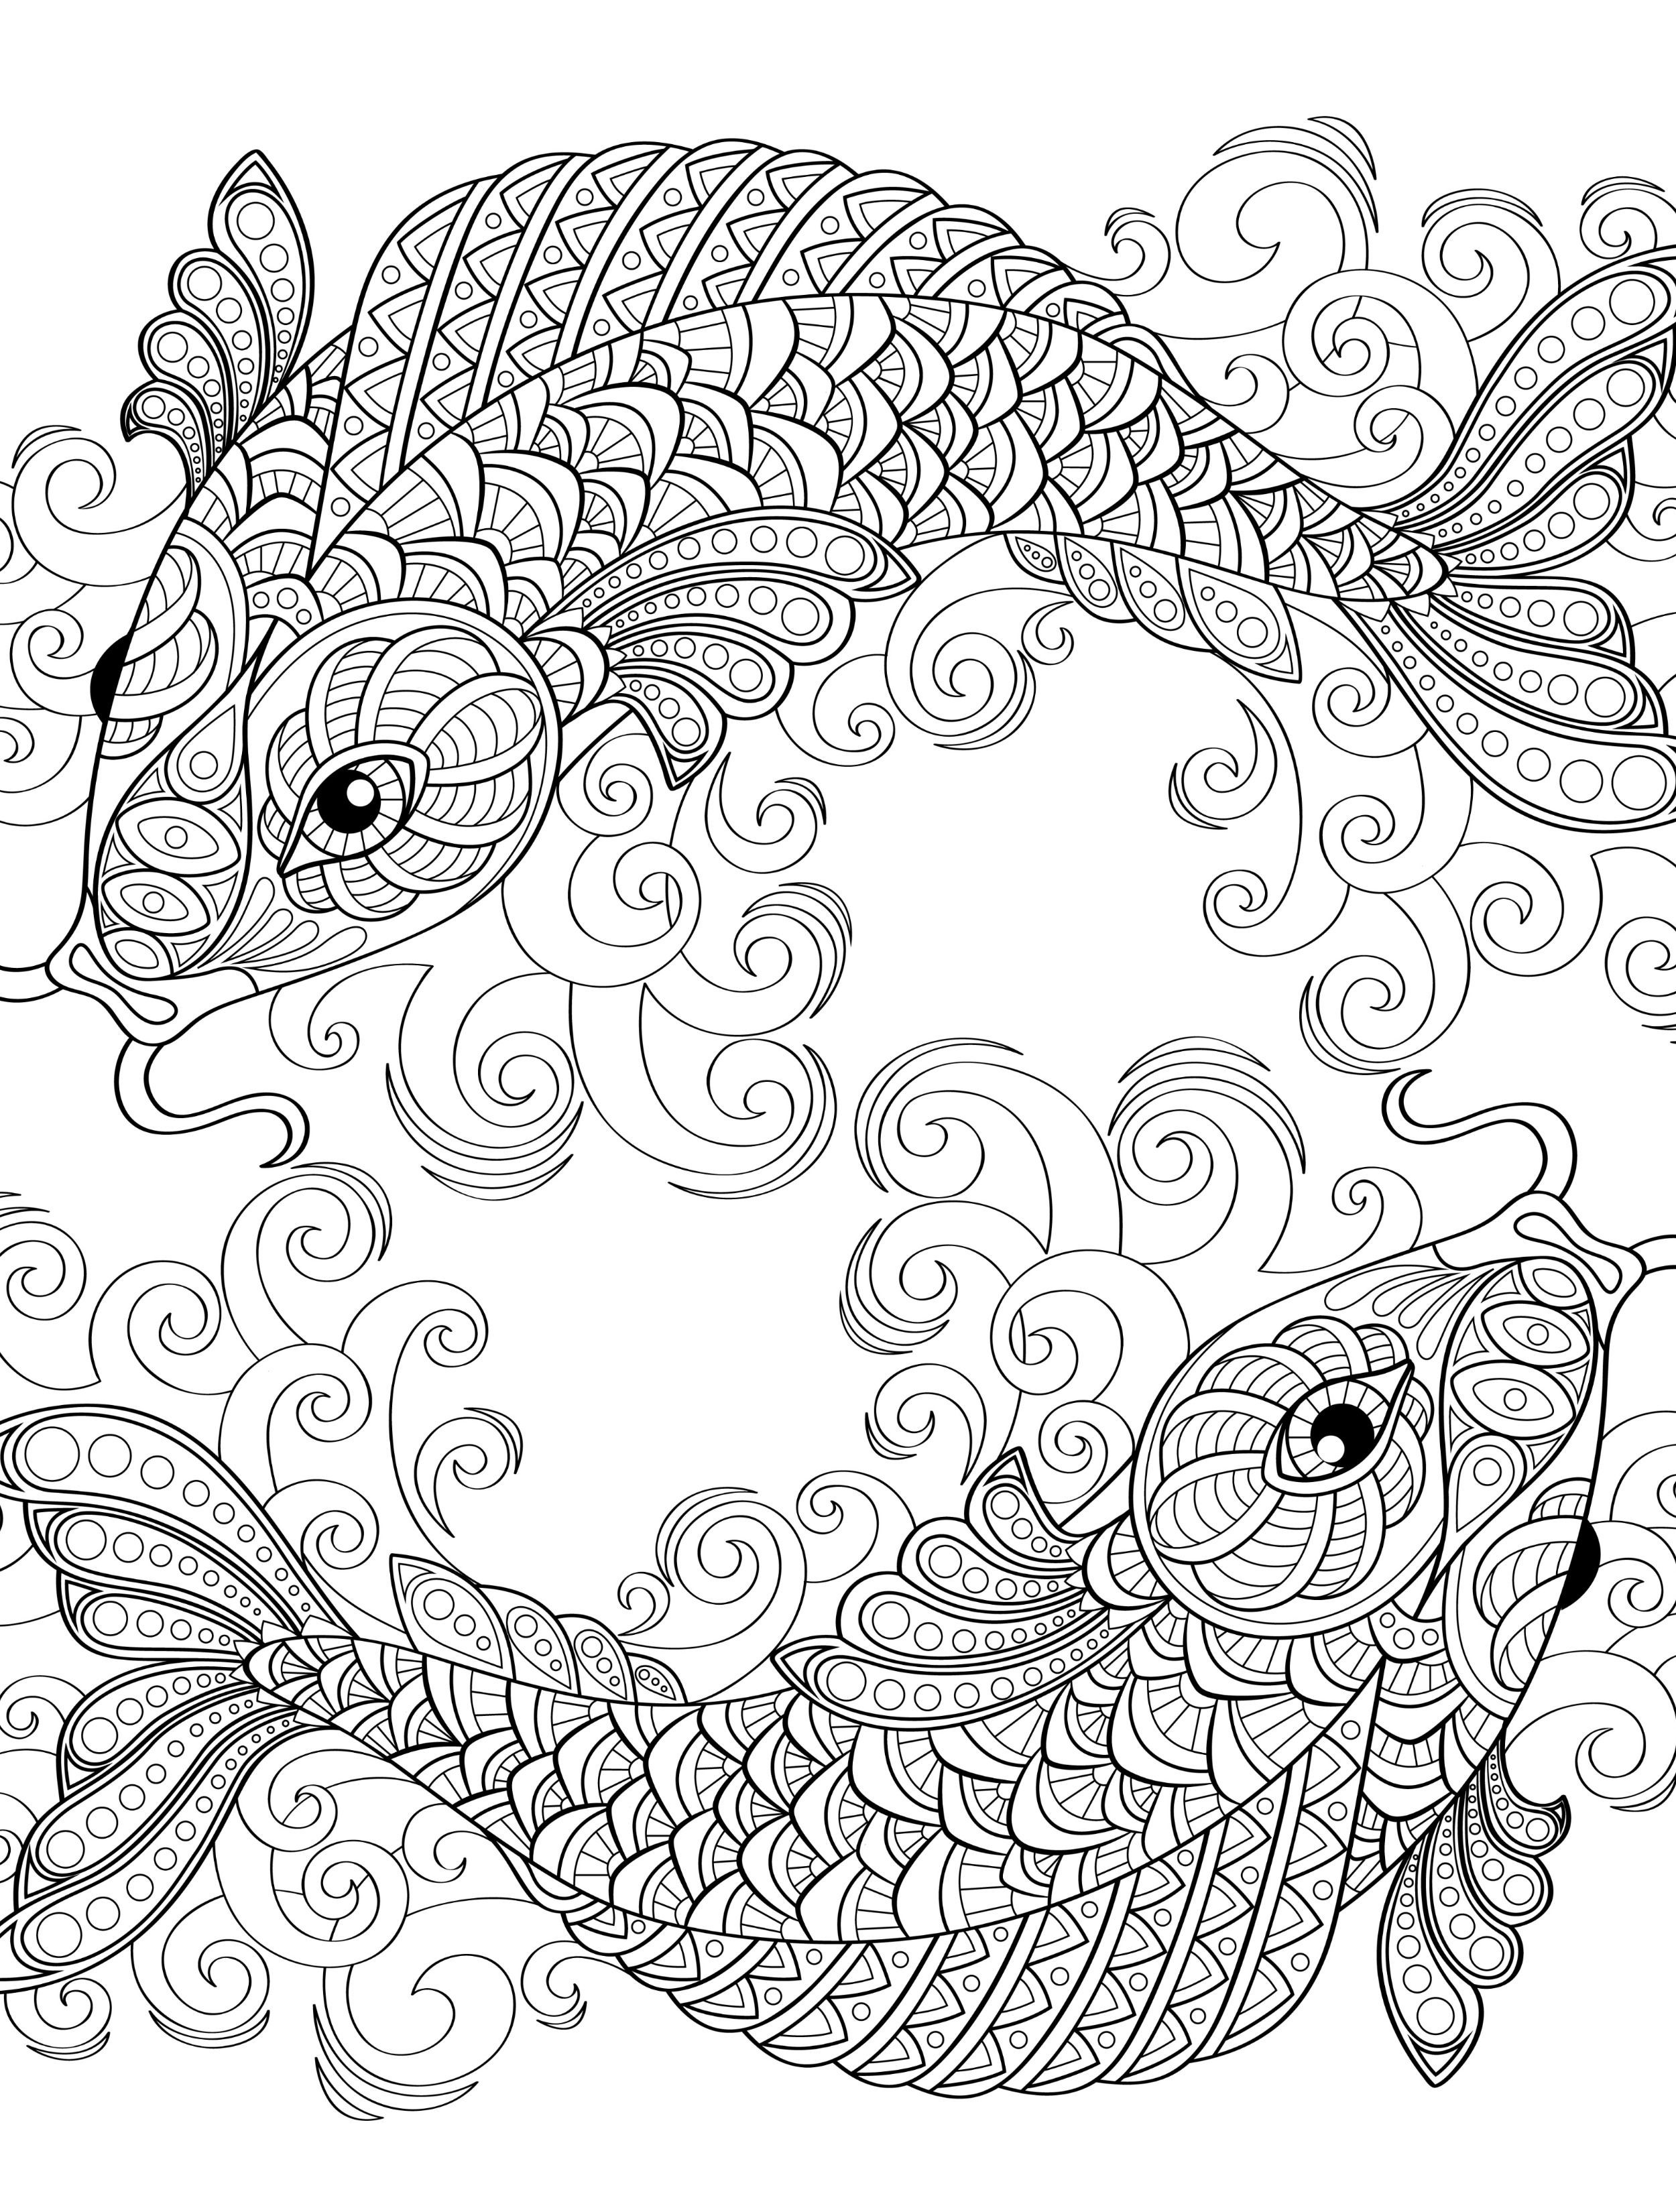 Coloring Pages For Adults Online
 18 Absurdly Whimsical Adult Coloring Pages